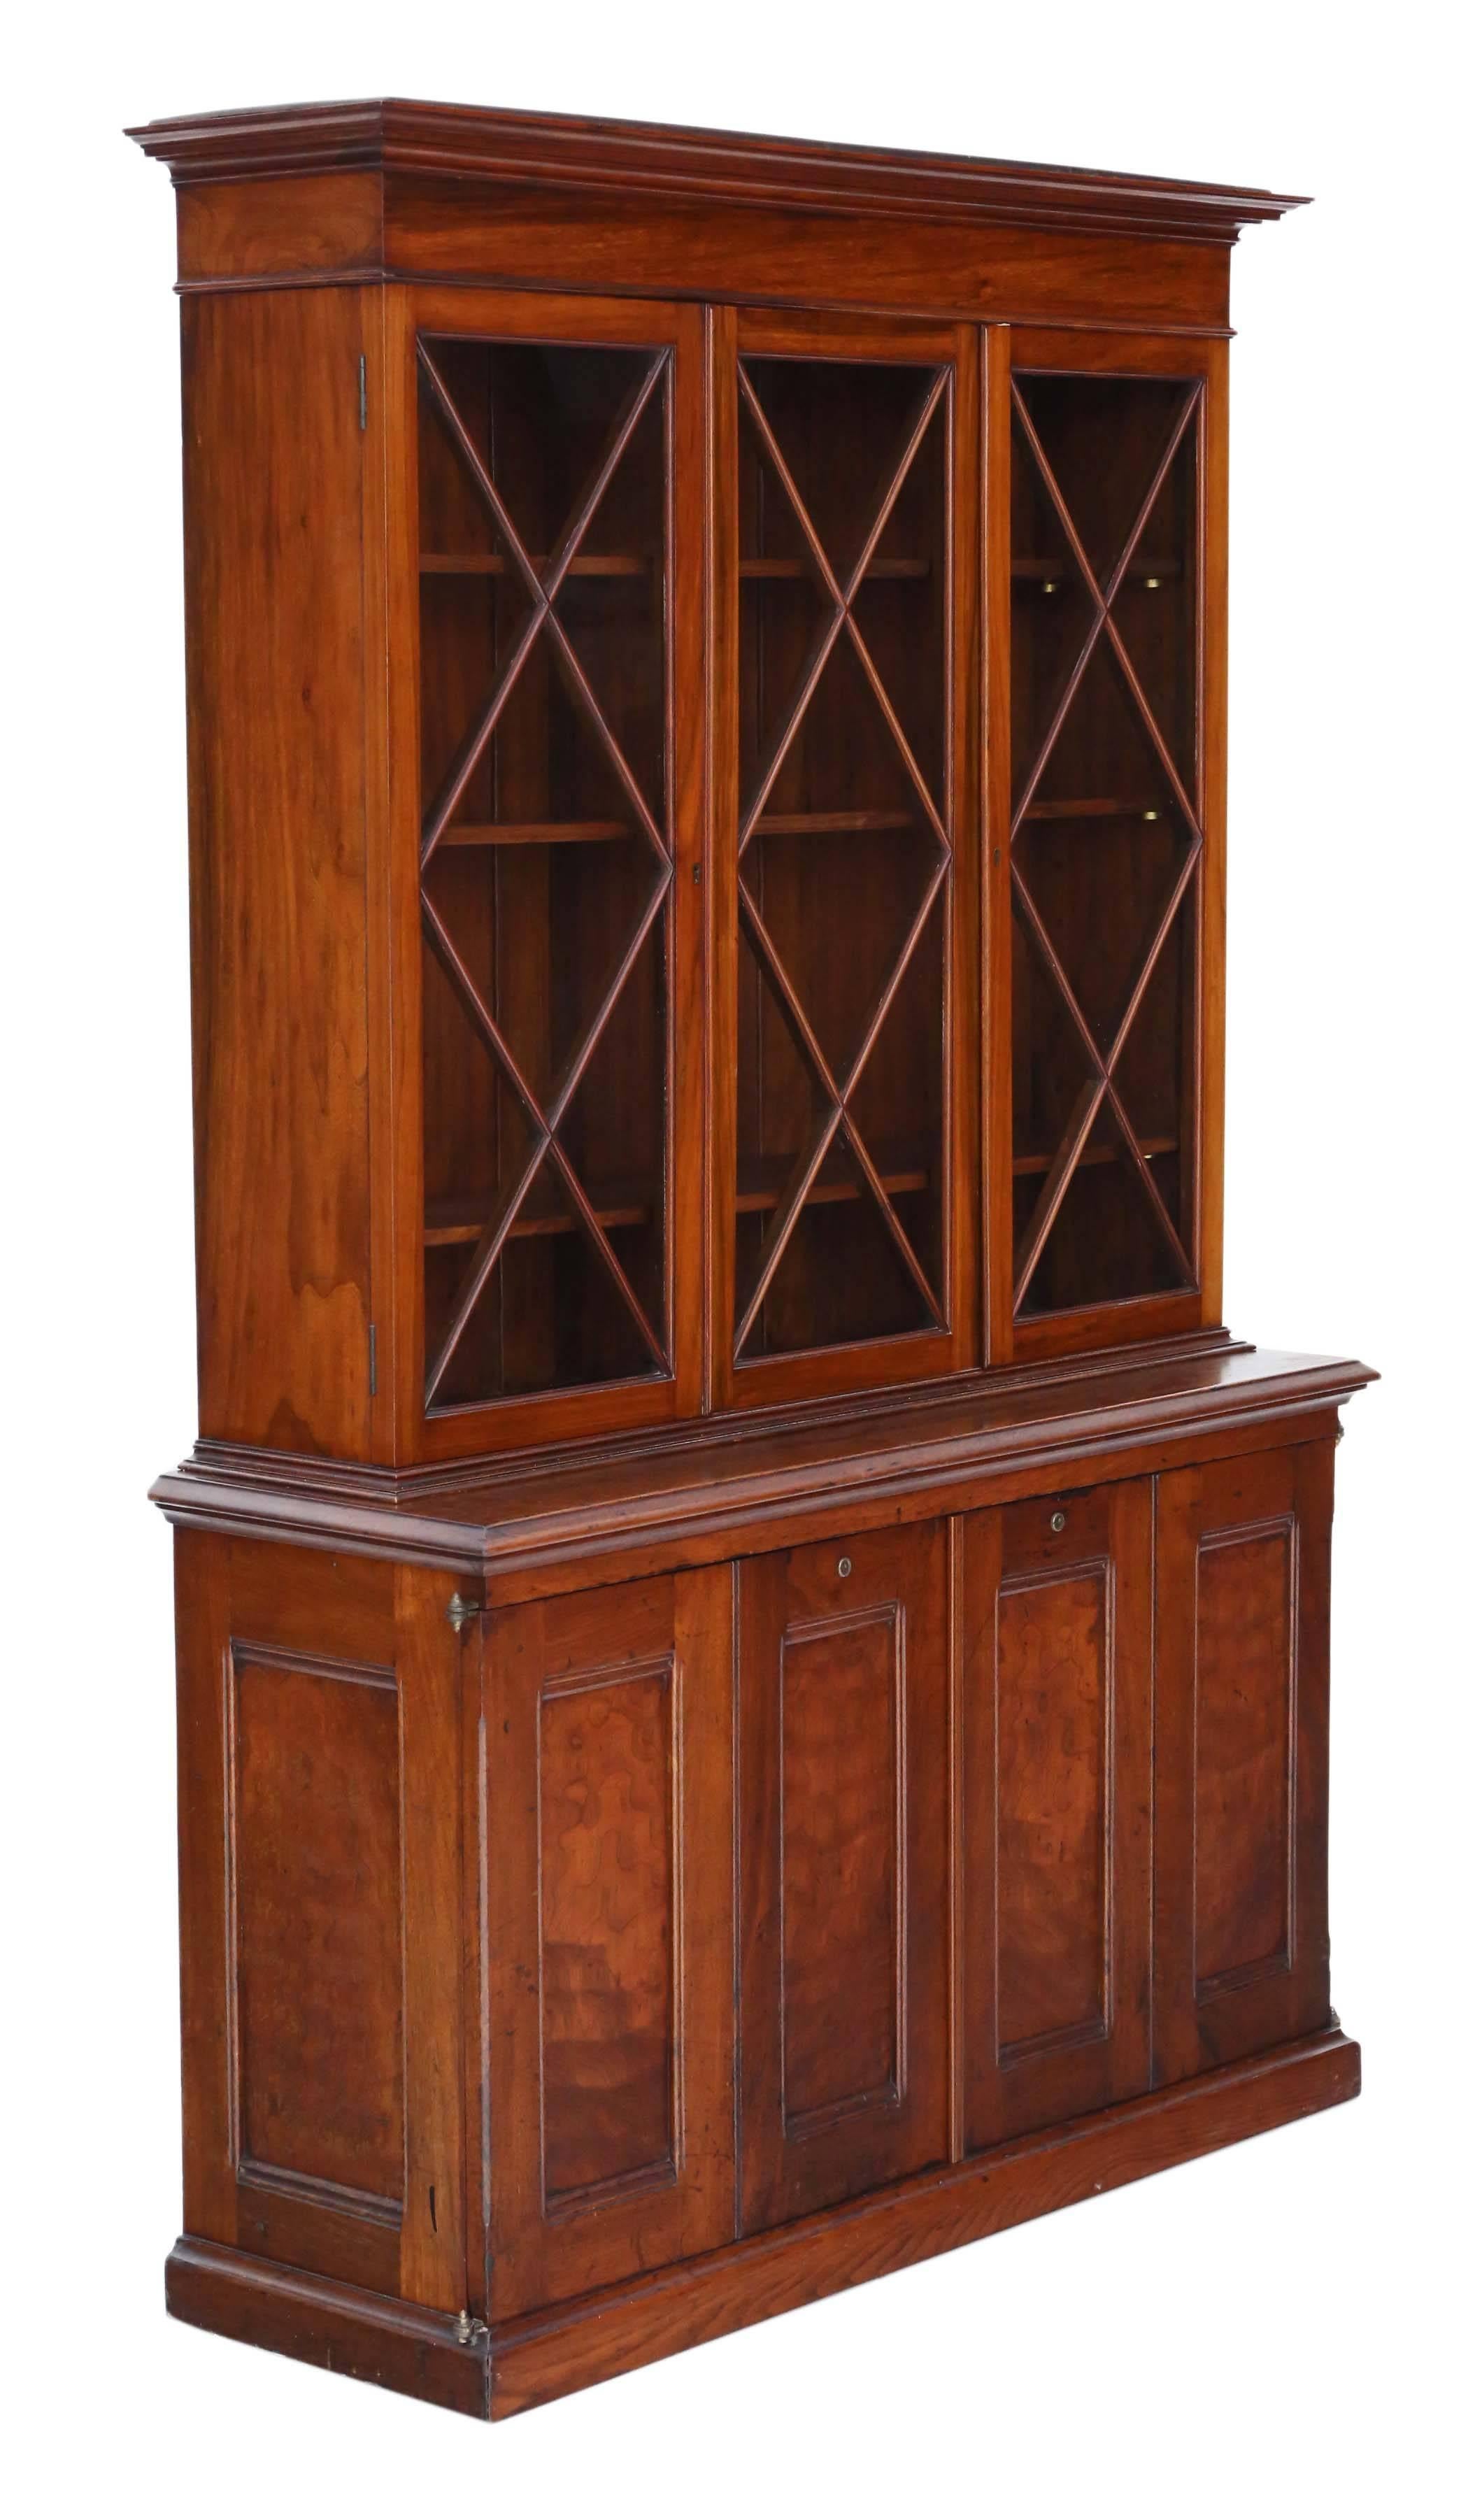 Antique quality late Victorian circa 1900 mahogany and walnut part glazed bookcase.

Solid and strong, with no loose joints. A lovely quality piece. No woodworm.

Would look great in the right location! There are some differences between the top